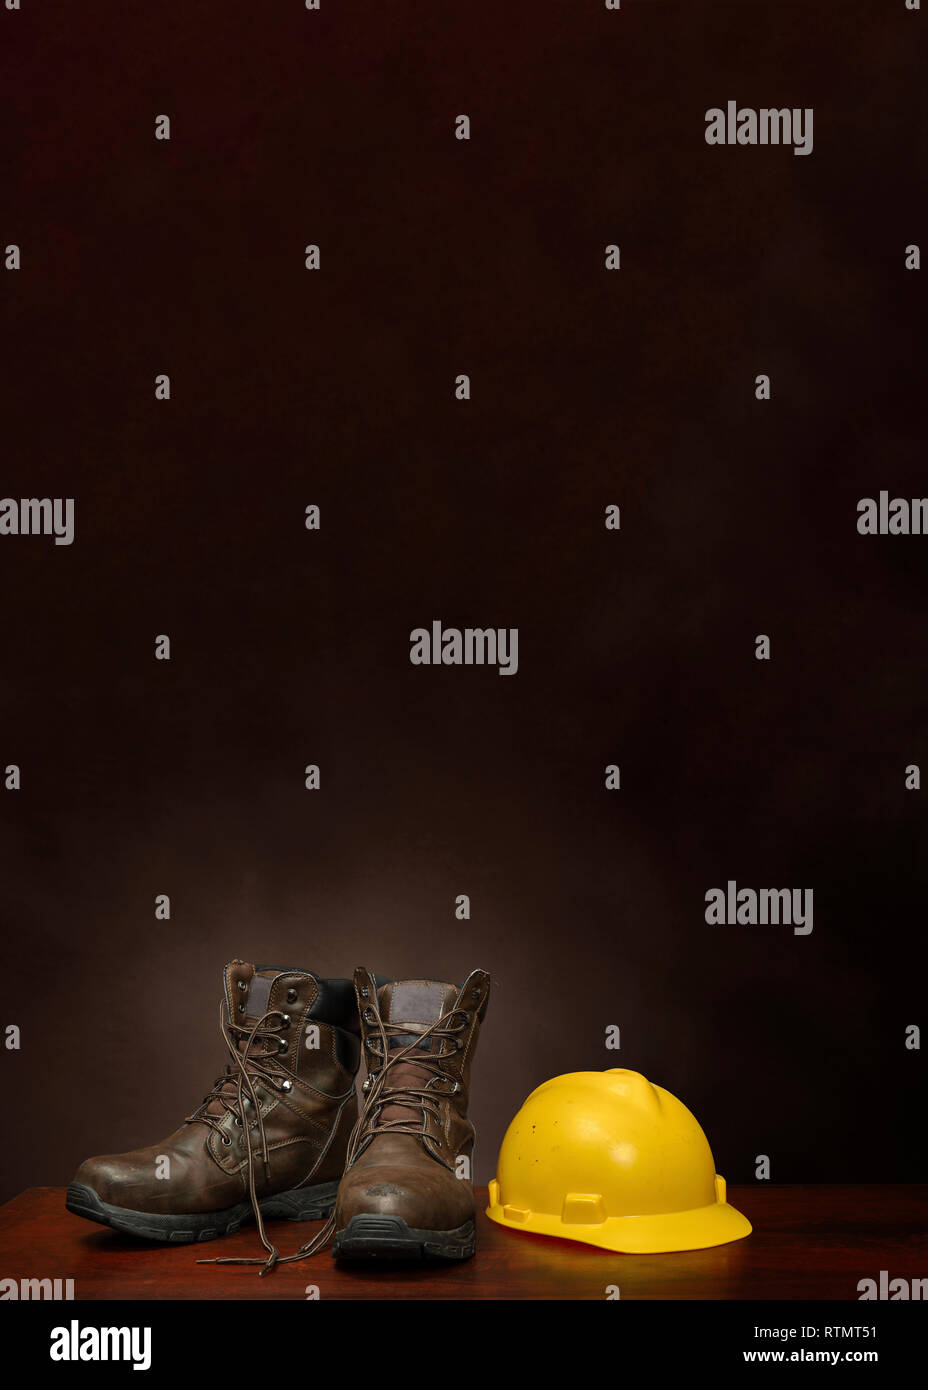 Vertical shot of a pair of brown work boots and a yellow construction helmet on a brown background with copy space. Stock Photo